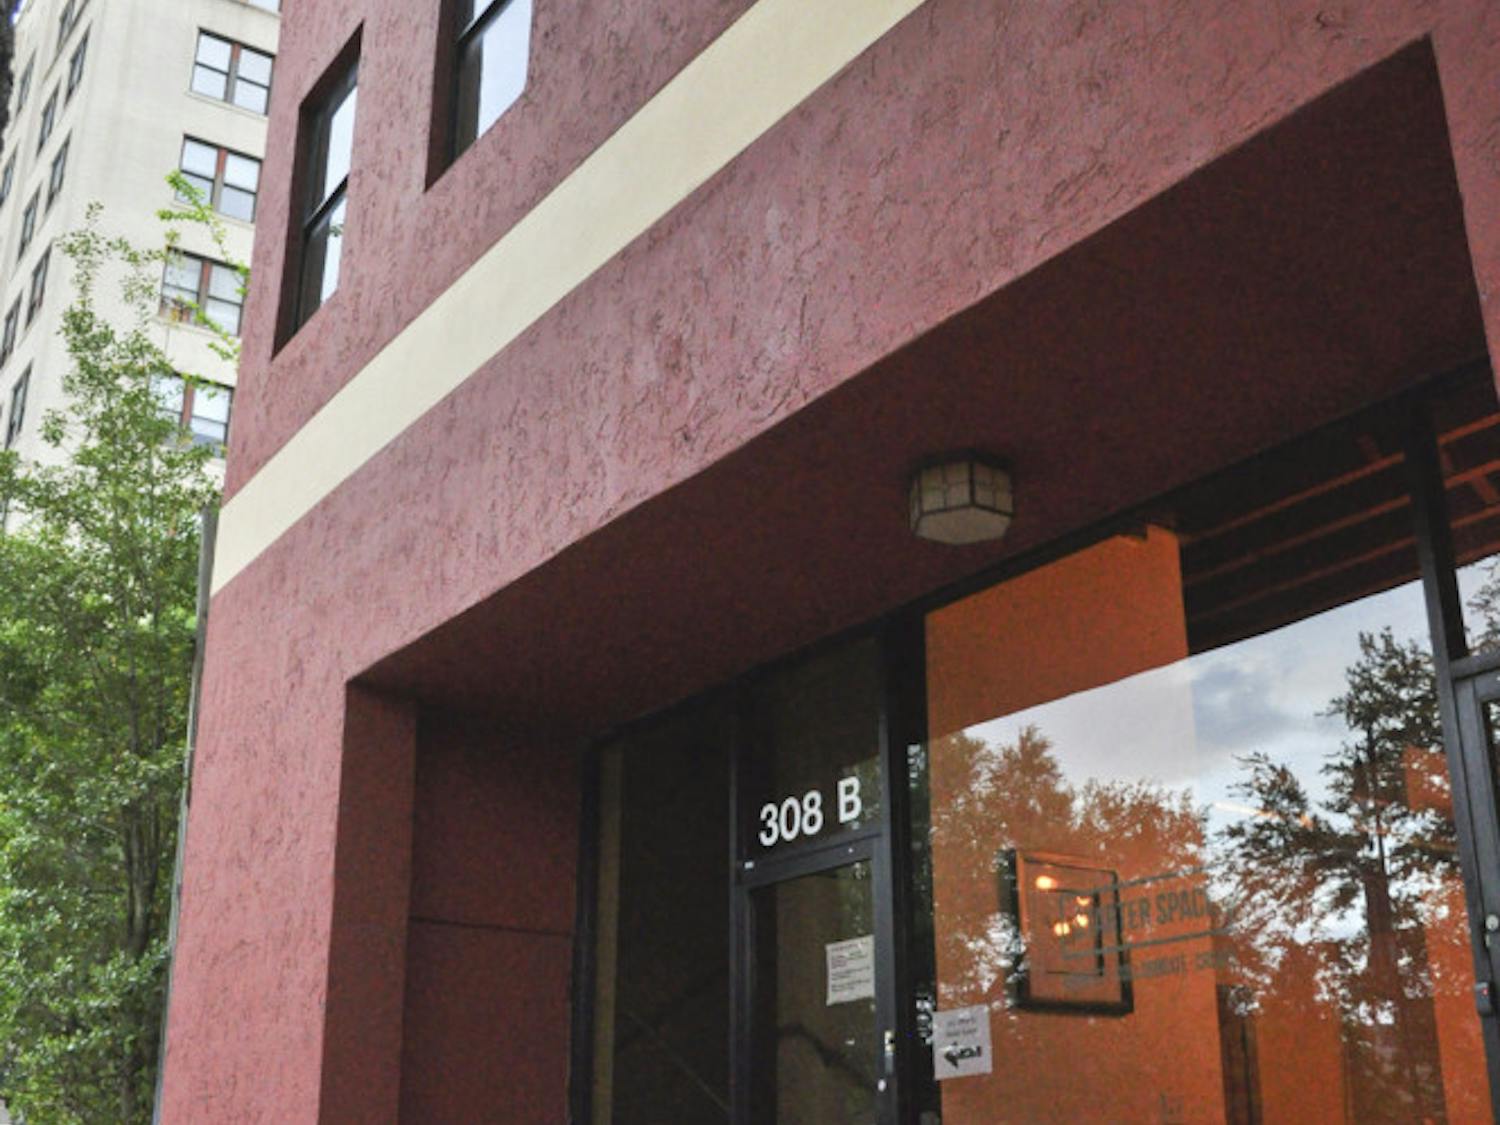 Pictured is the exterior of Starter Space, a startup incubator located on 308 W. University Ave.